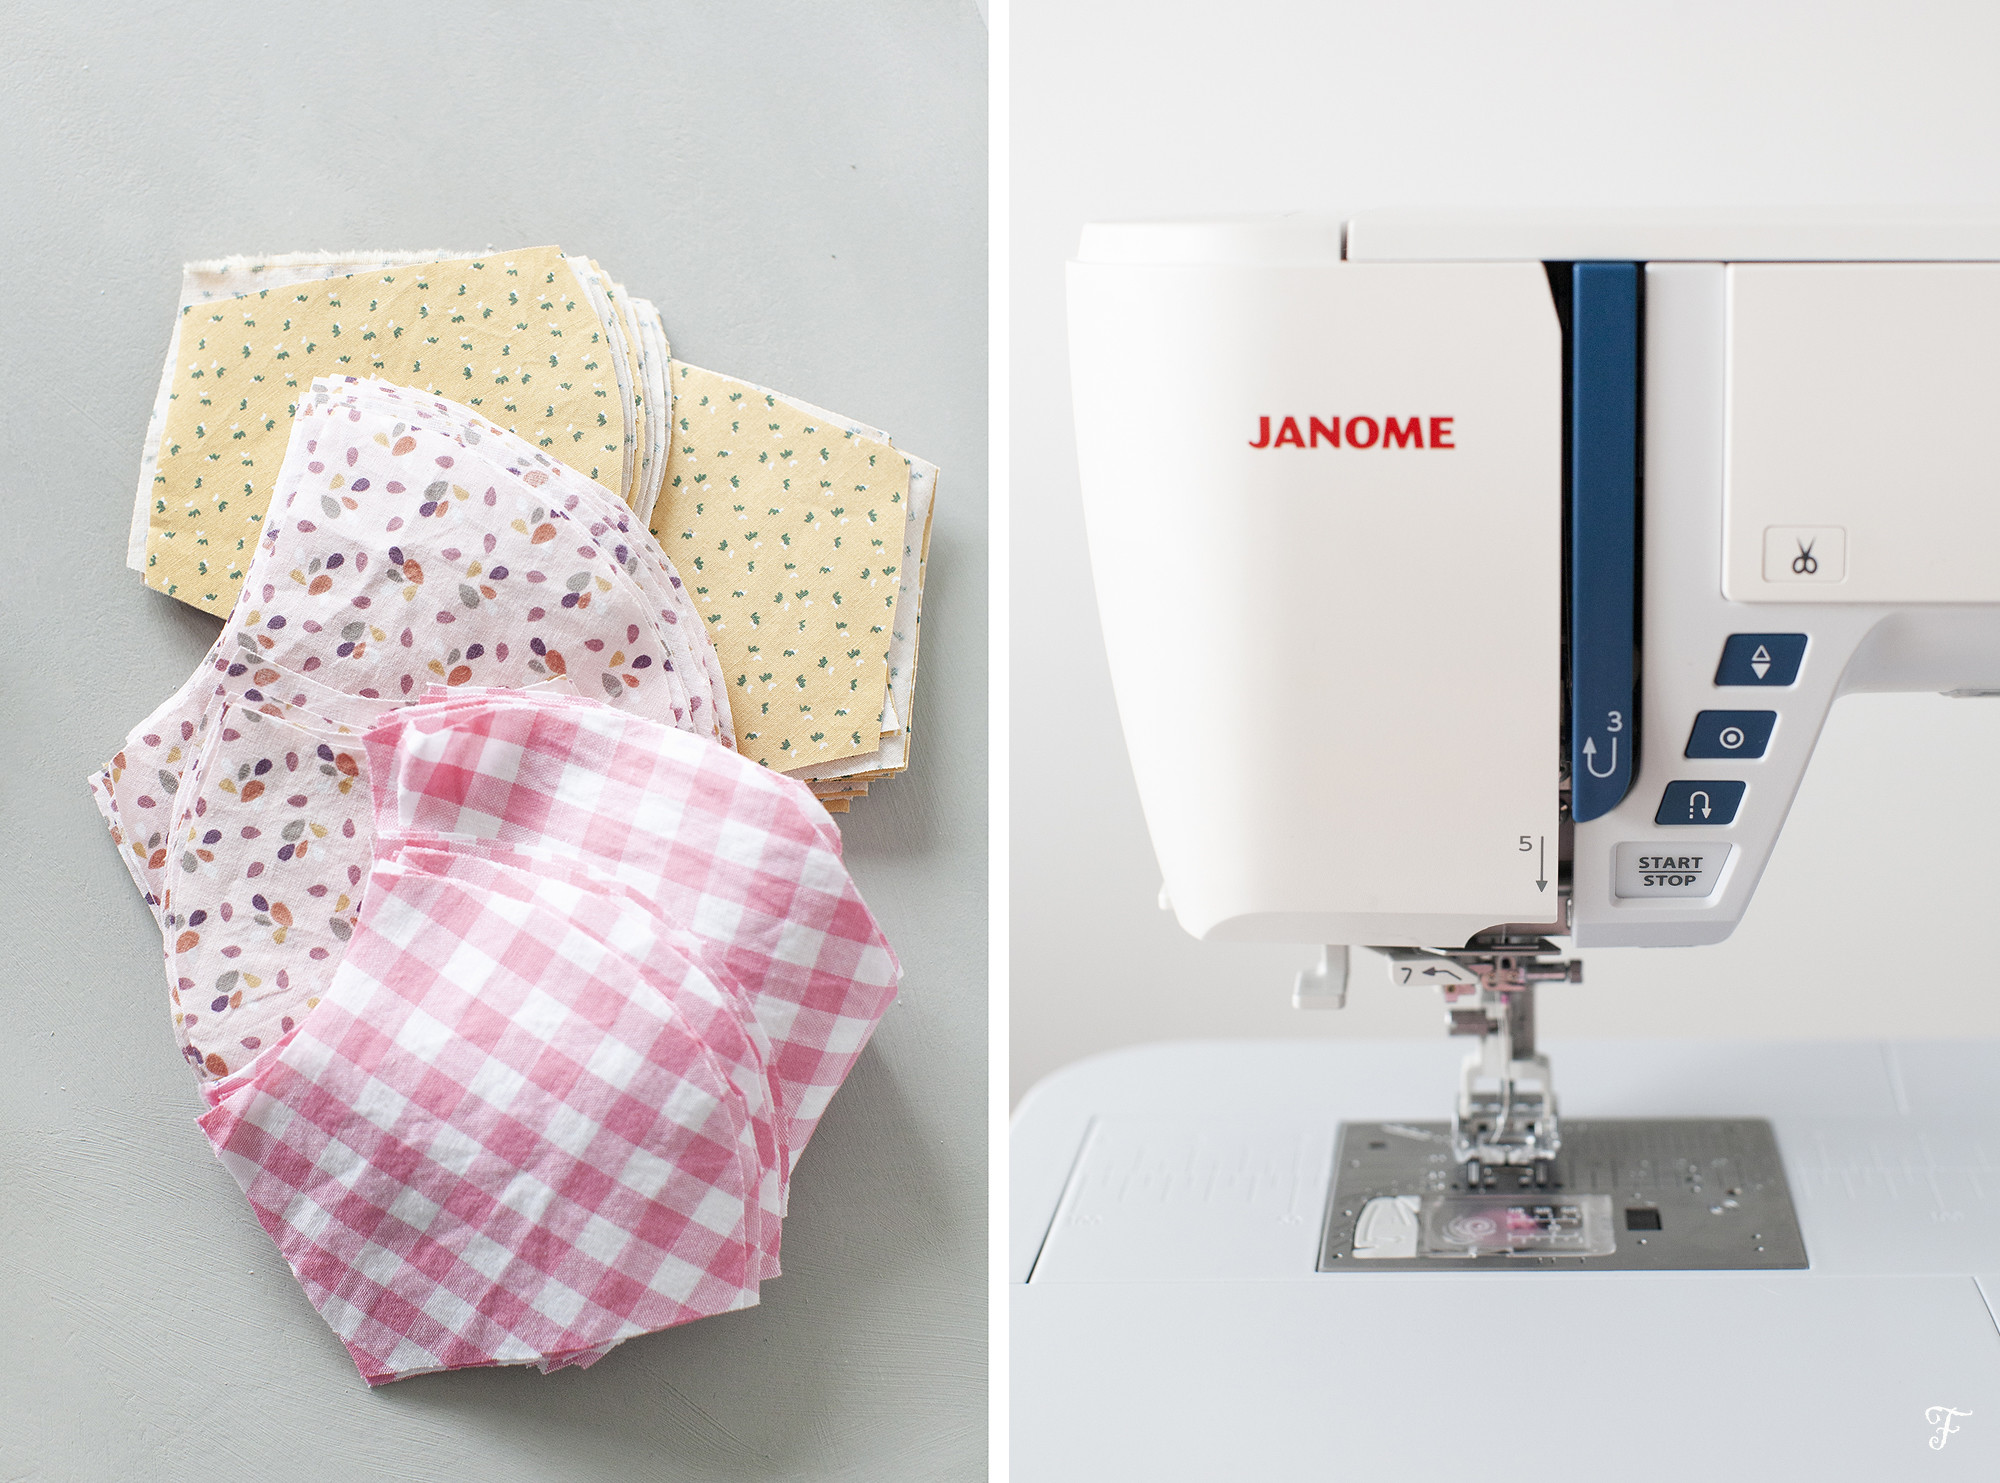 FENSISMENSI facemask skyline s6 janome sewing machine covid 19